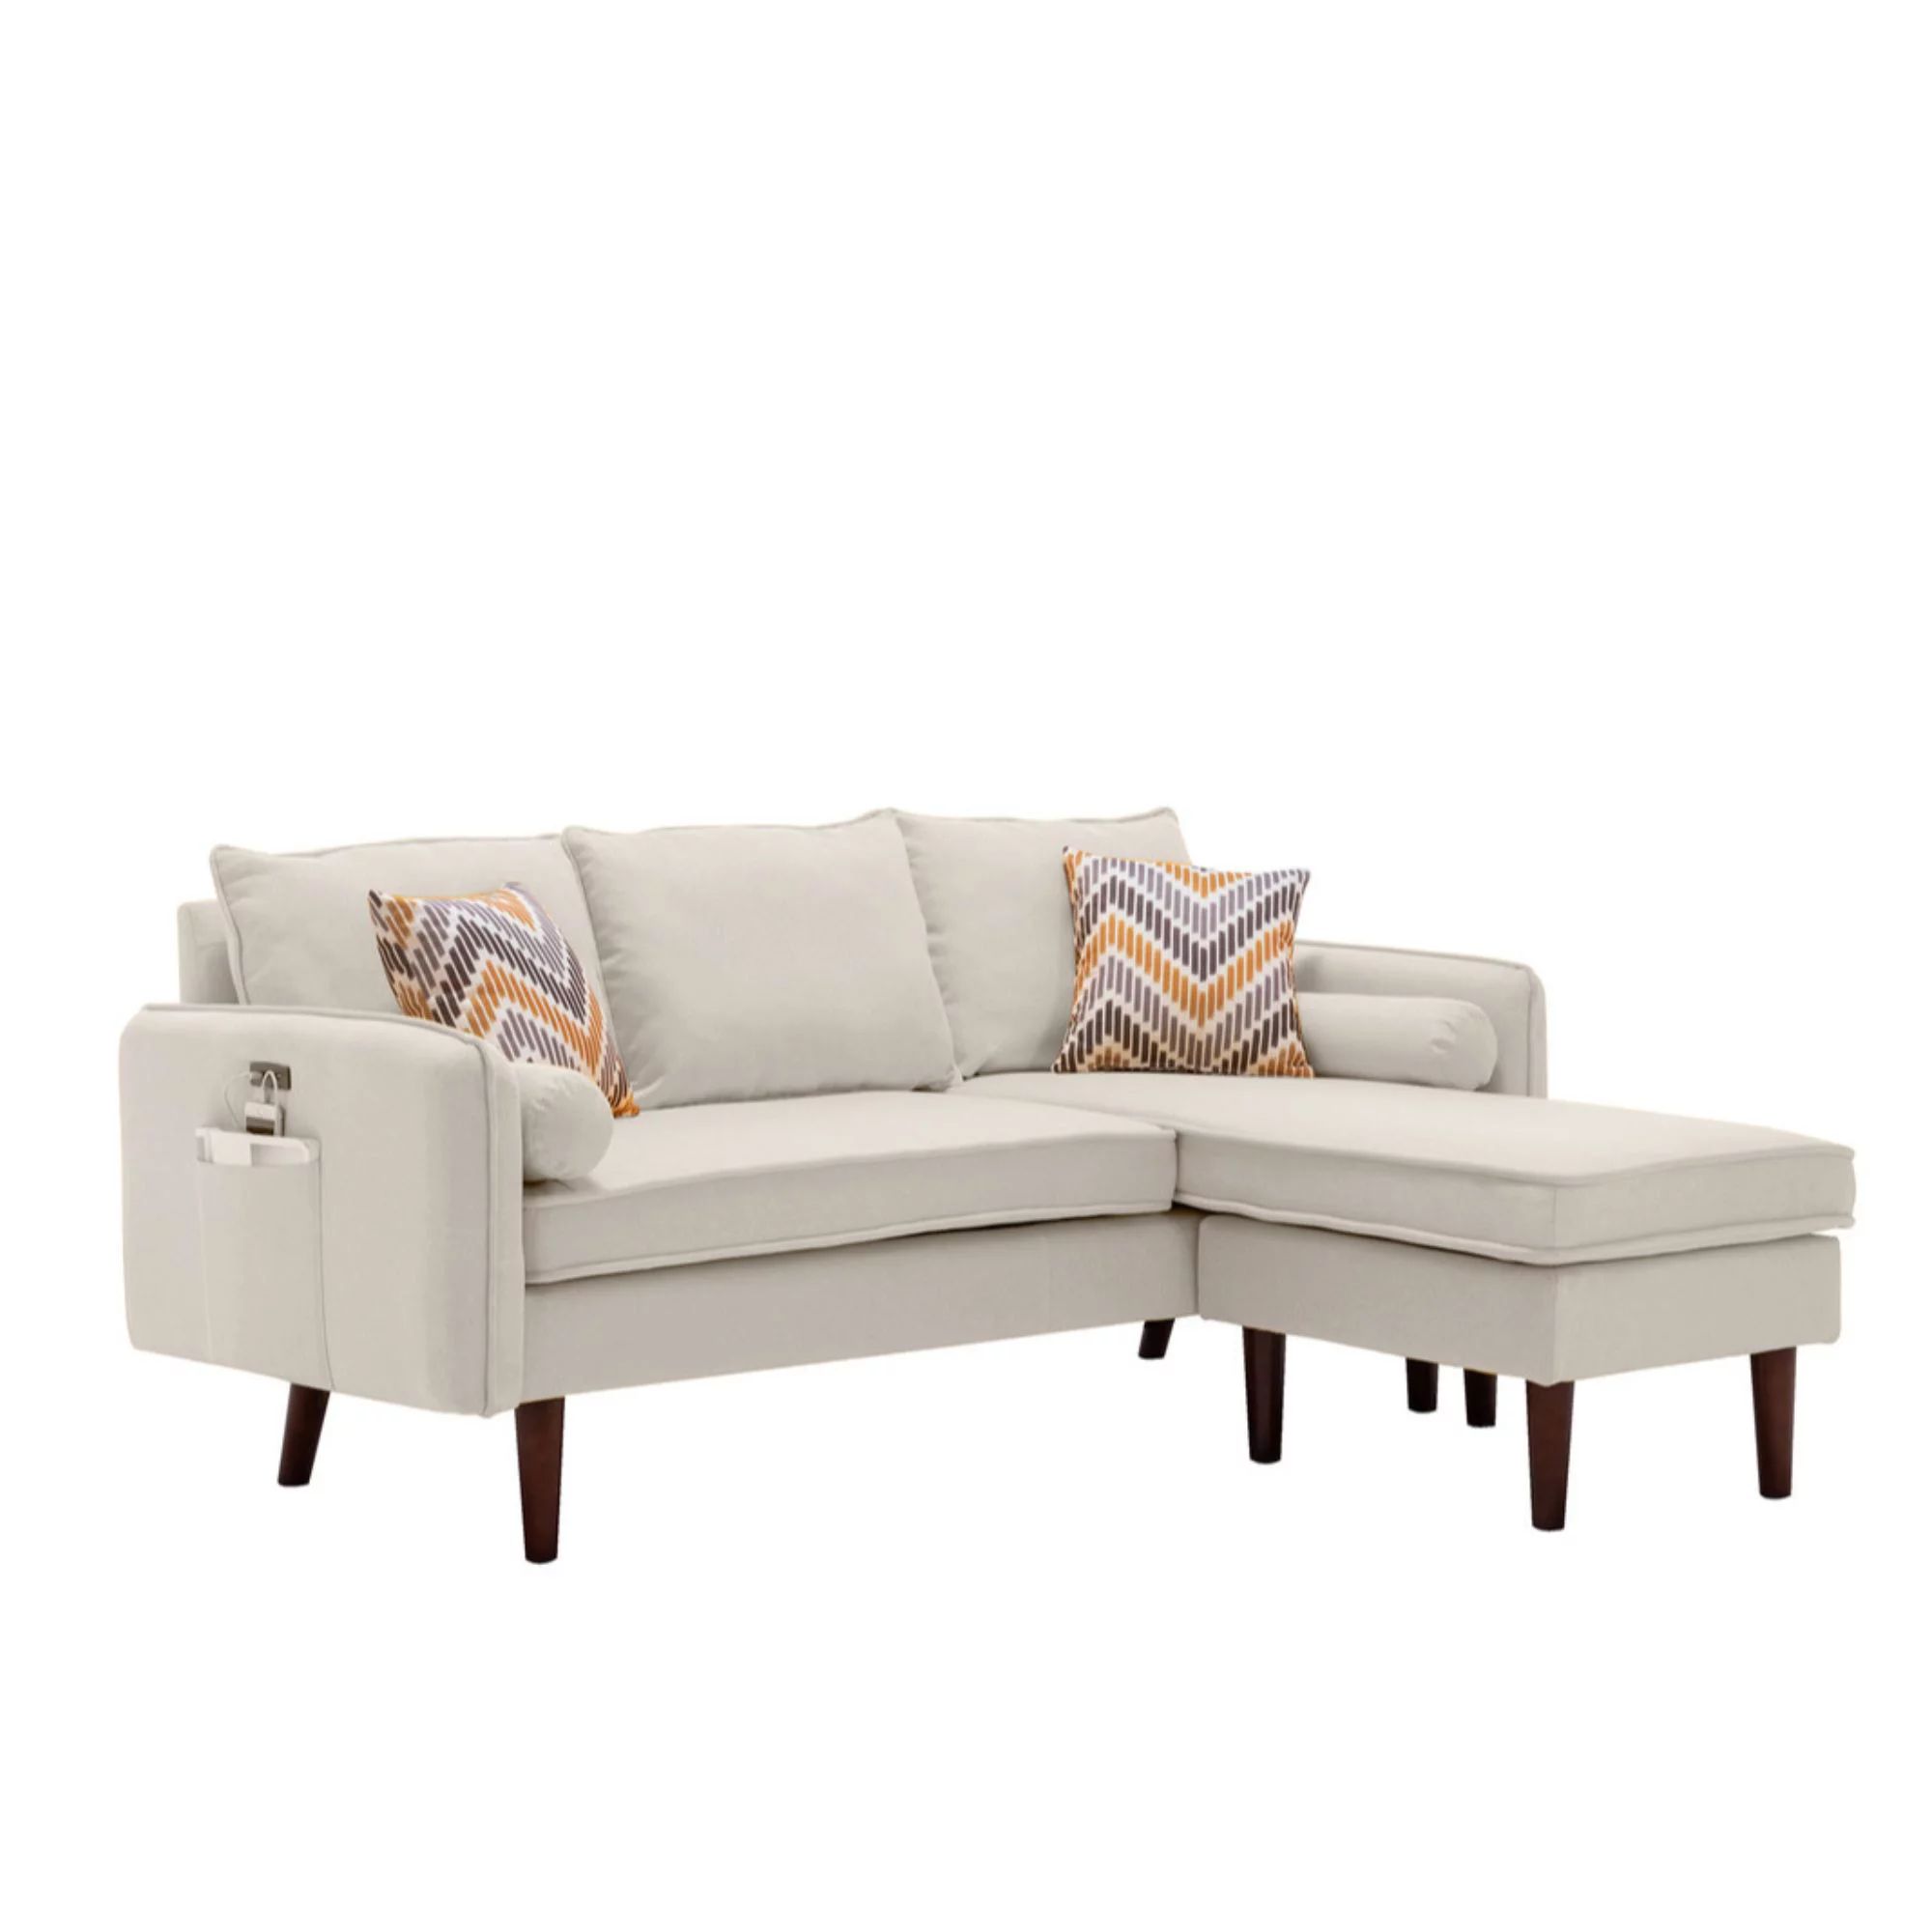 70" Mia White Sectional Sofa Chaise with USB Charger and Pillows - Walmart.com | Walmart (US)